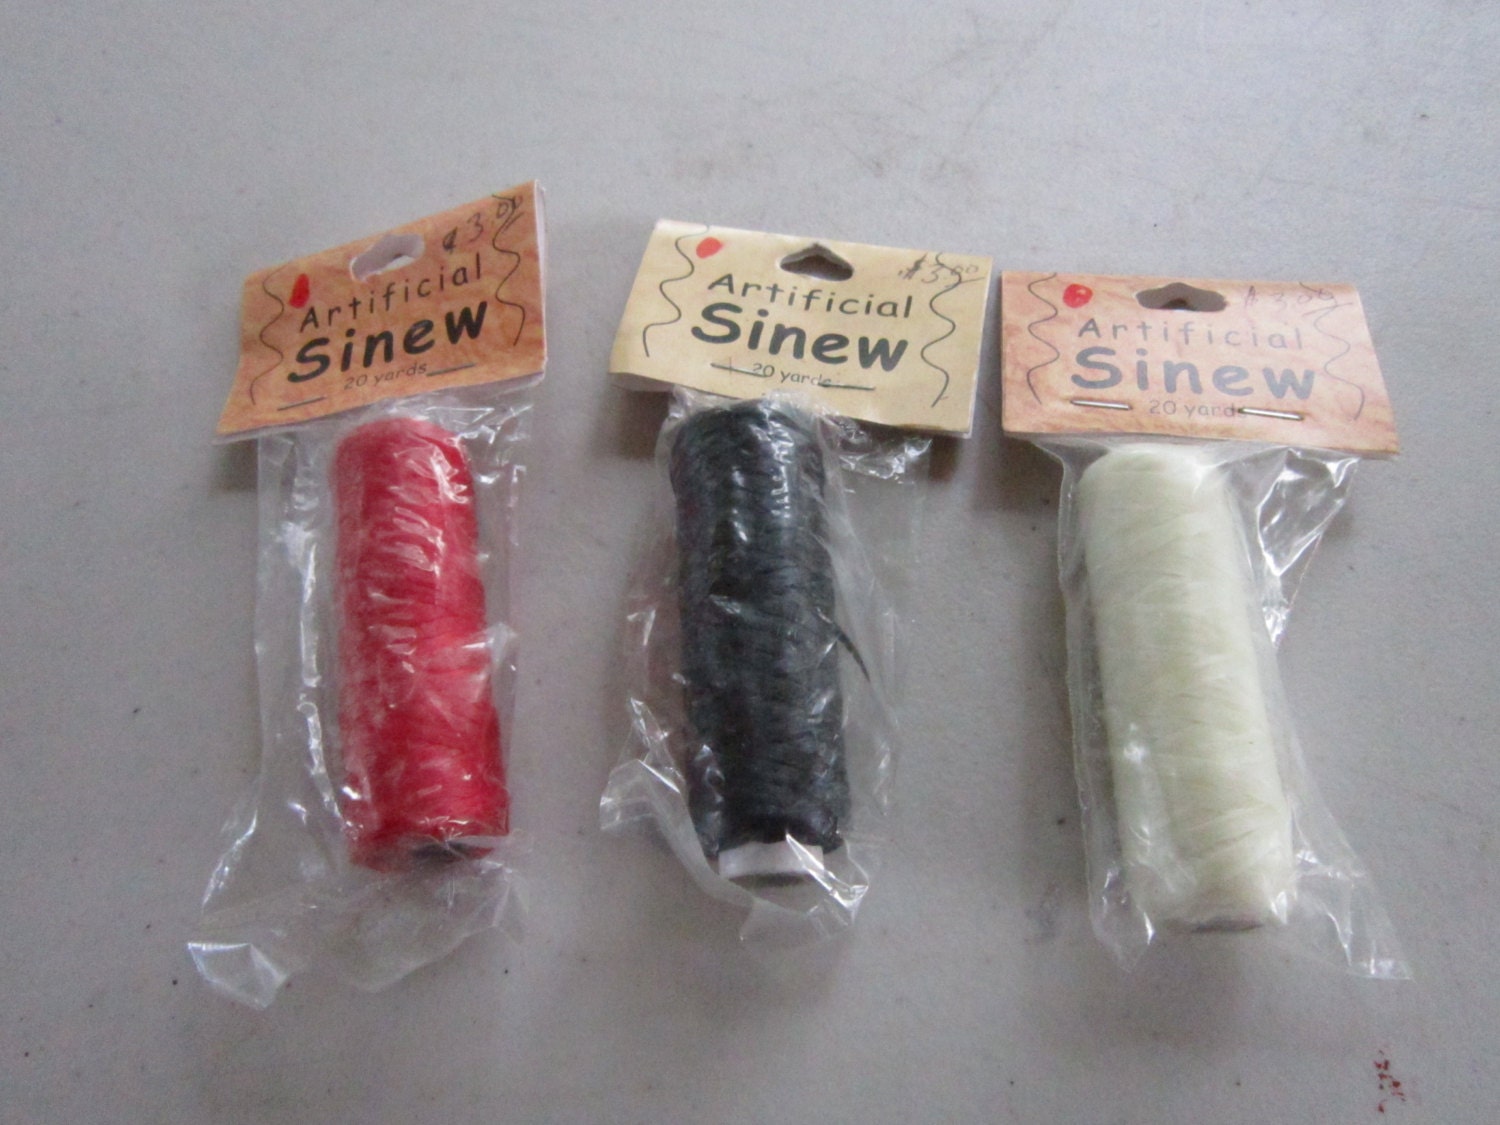 Imitation Sinew Black Artificial Deer 3 Ply 4 oz Craft and Beading